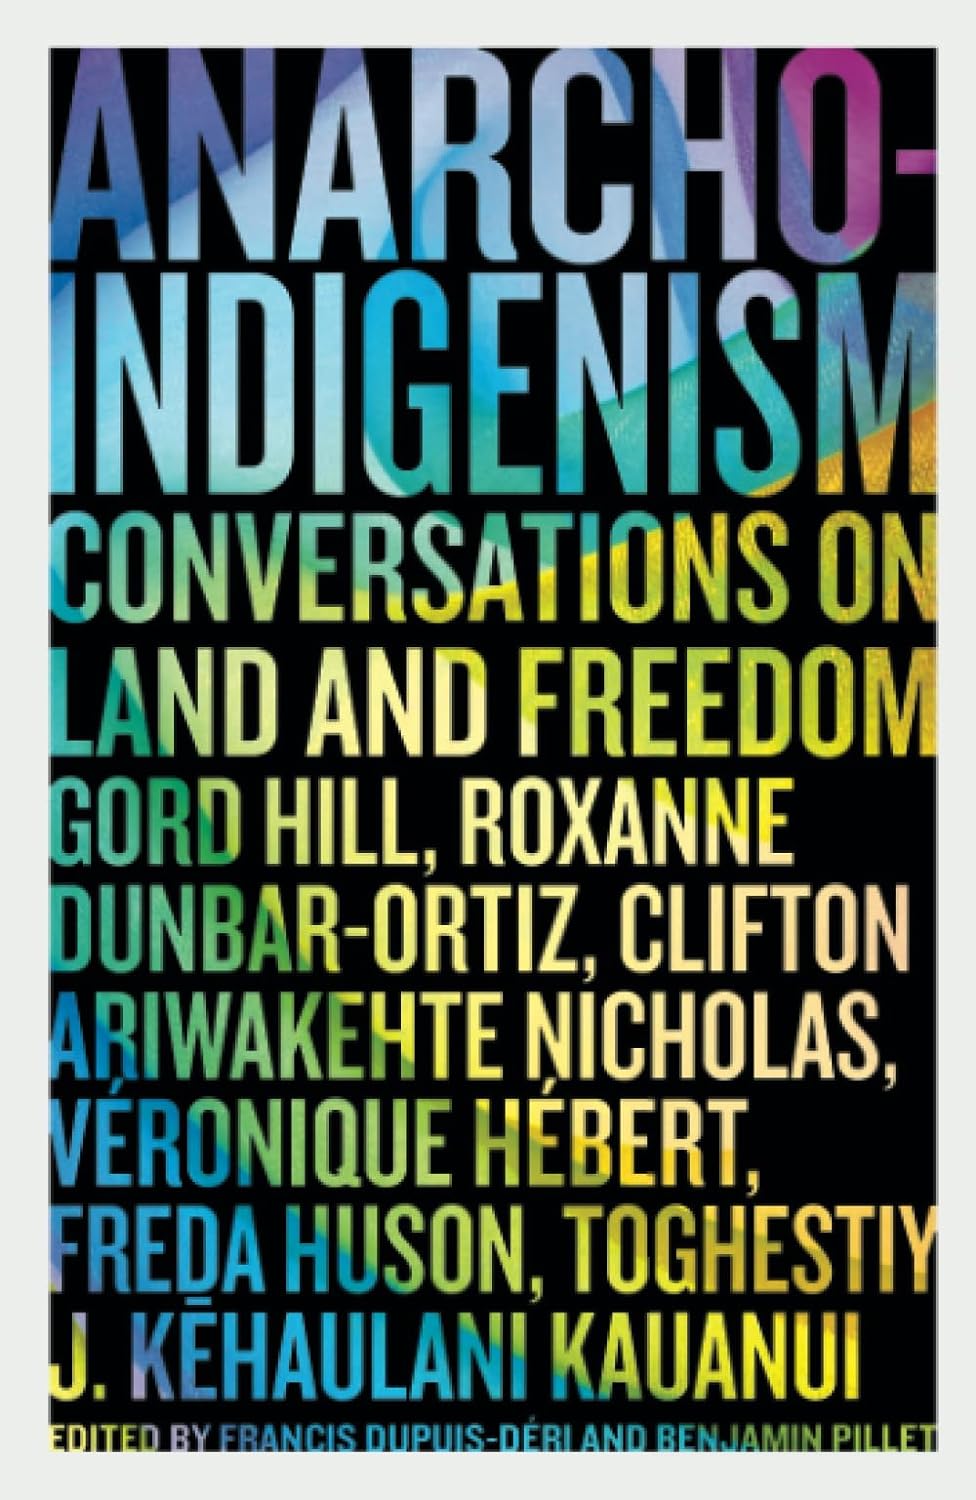 Anarcho-Indigenism: Converstions on Land and Freedom edited by Francis Dupuis-Déri & Benjamin Pillet